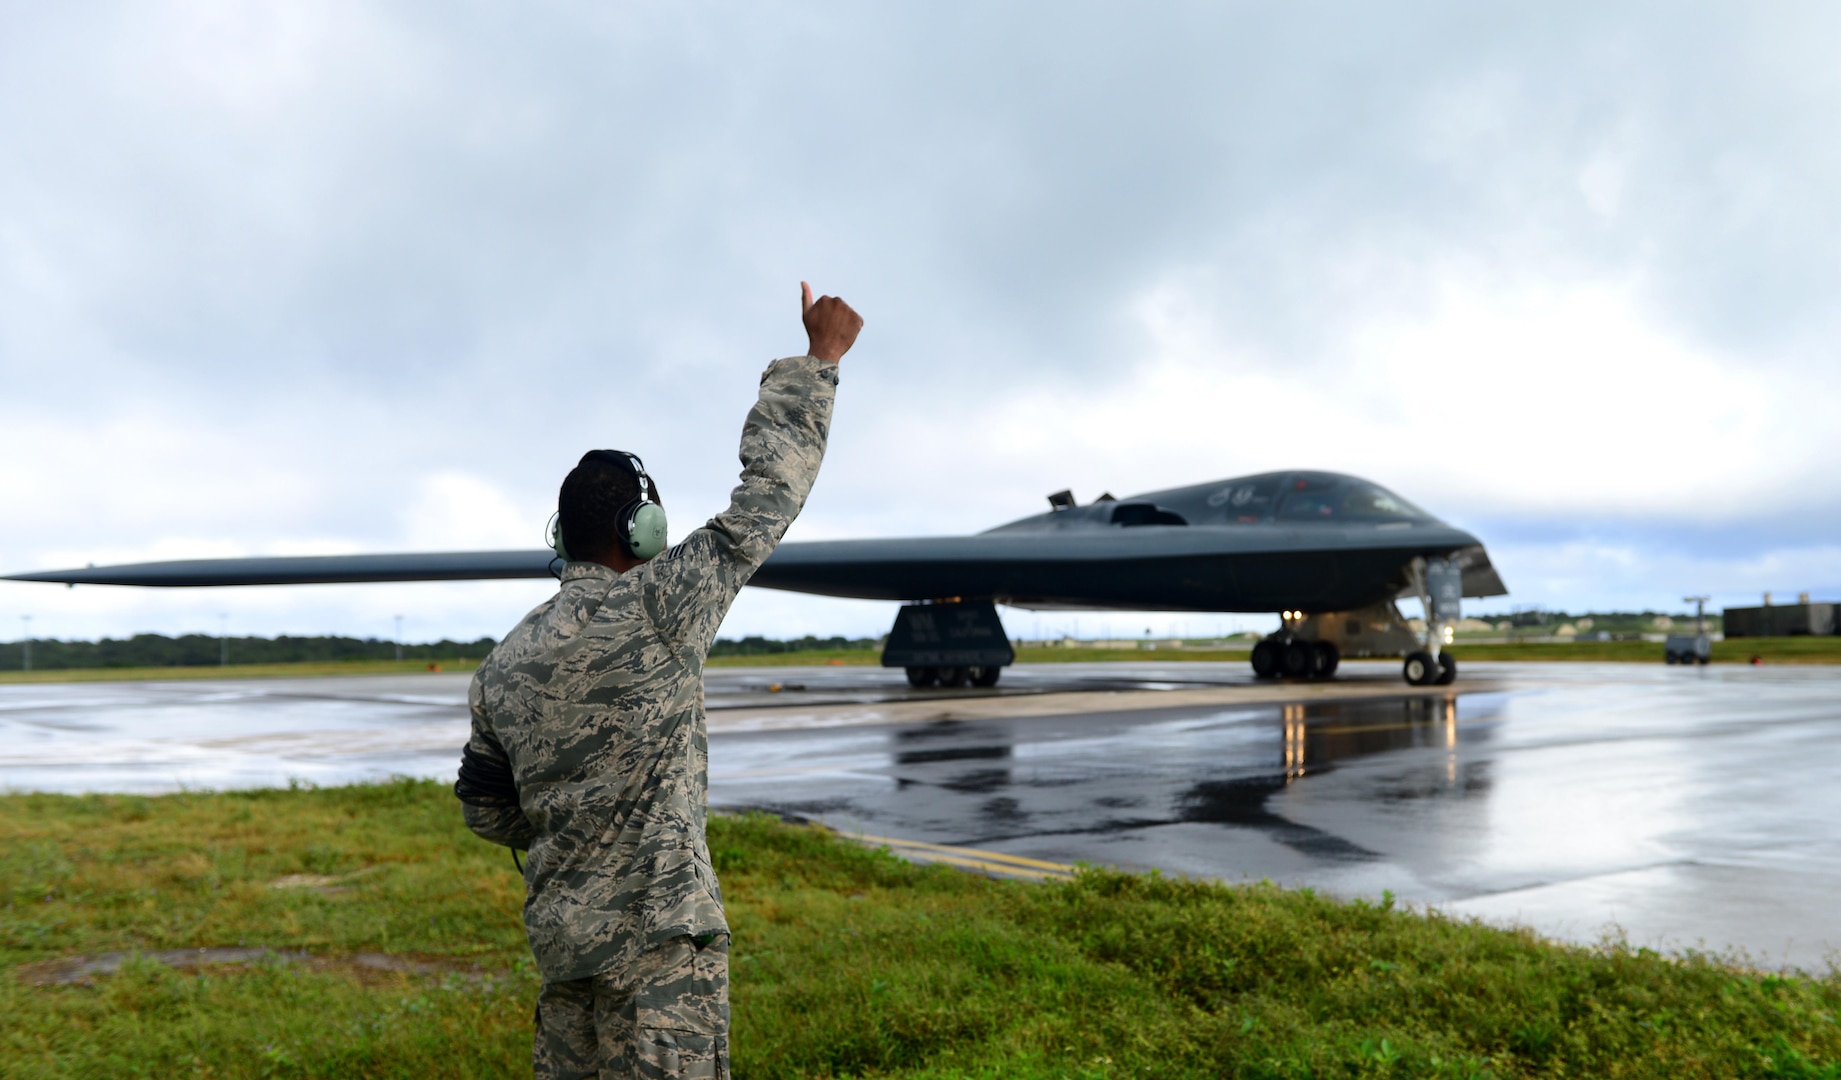 U.S. Air Force Senior Airman Dez Starkes, a crew chief assigned to the 509th Aircraft Maintenance Squadron, signals to the mission commander that he is clear and free to move forward at Andersen Air Force Base, Guam, Jan. 12, 2017. Strategic bomber missions enhance the readiness and training necessary to respond to any potential crisis or challenge across the globe. (U.S. Air Force photo by Airman 1st Class Jazmin Smith)